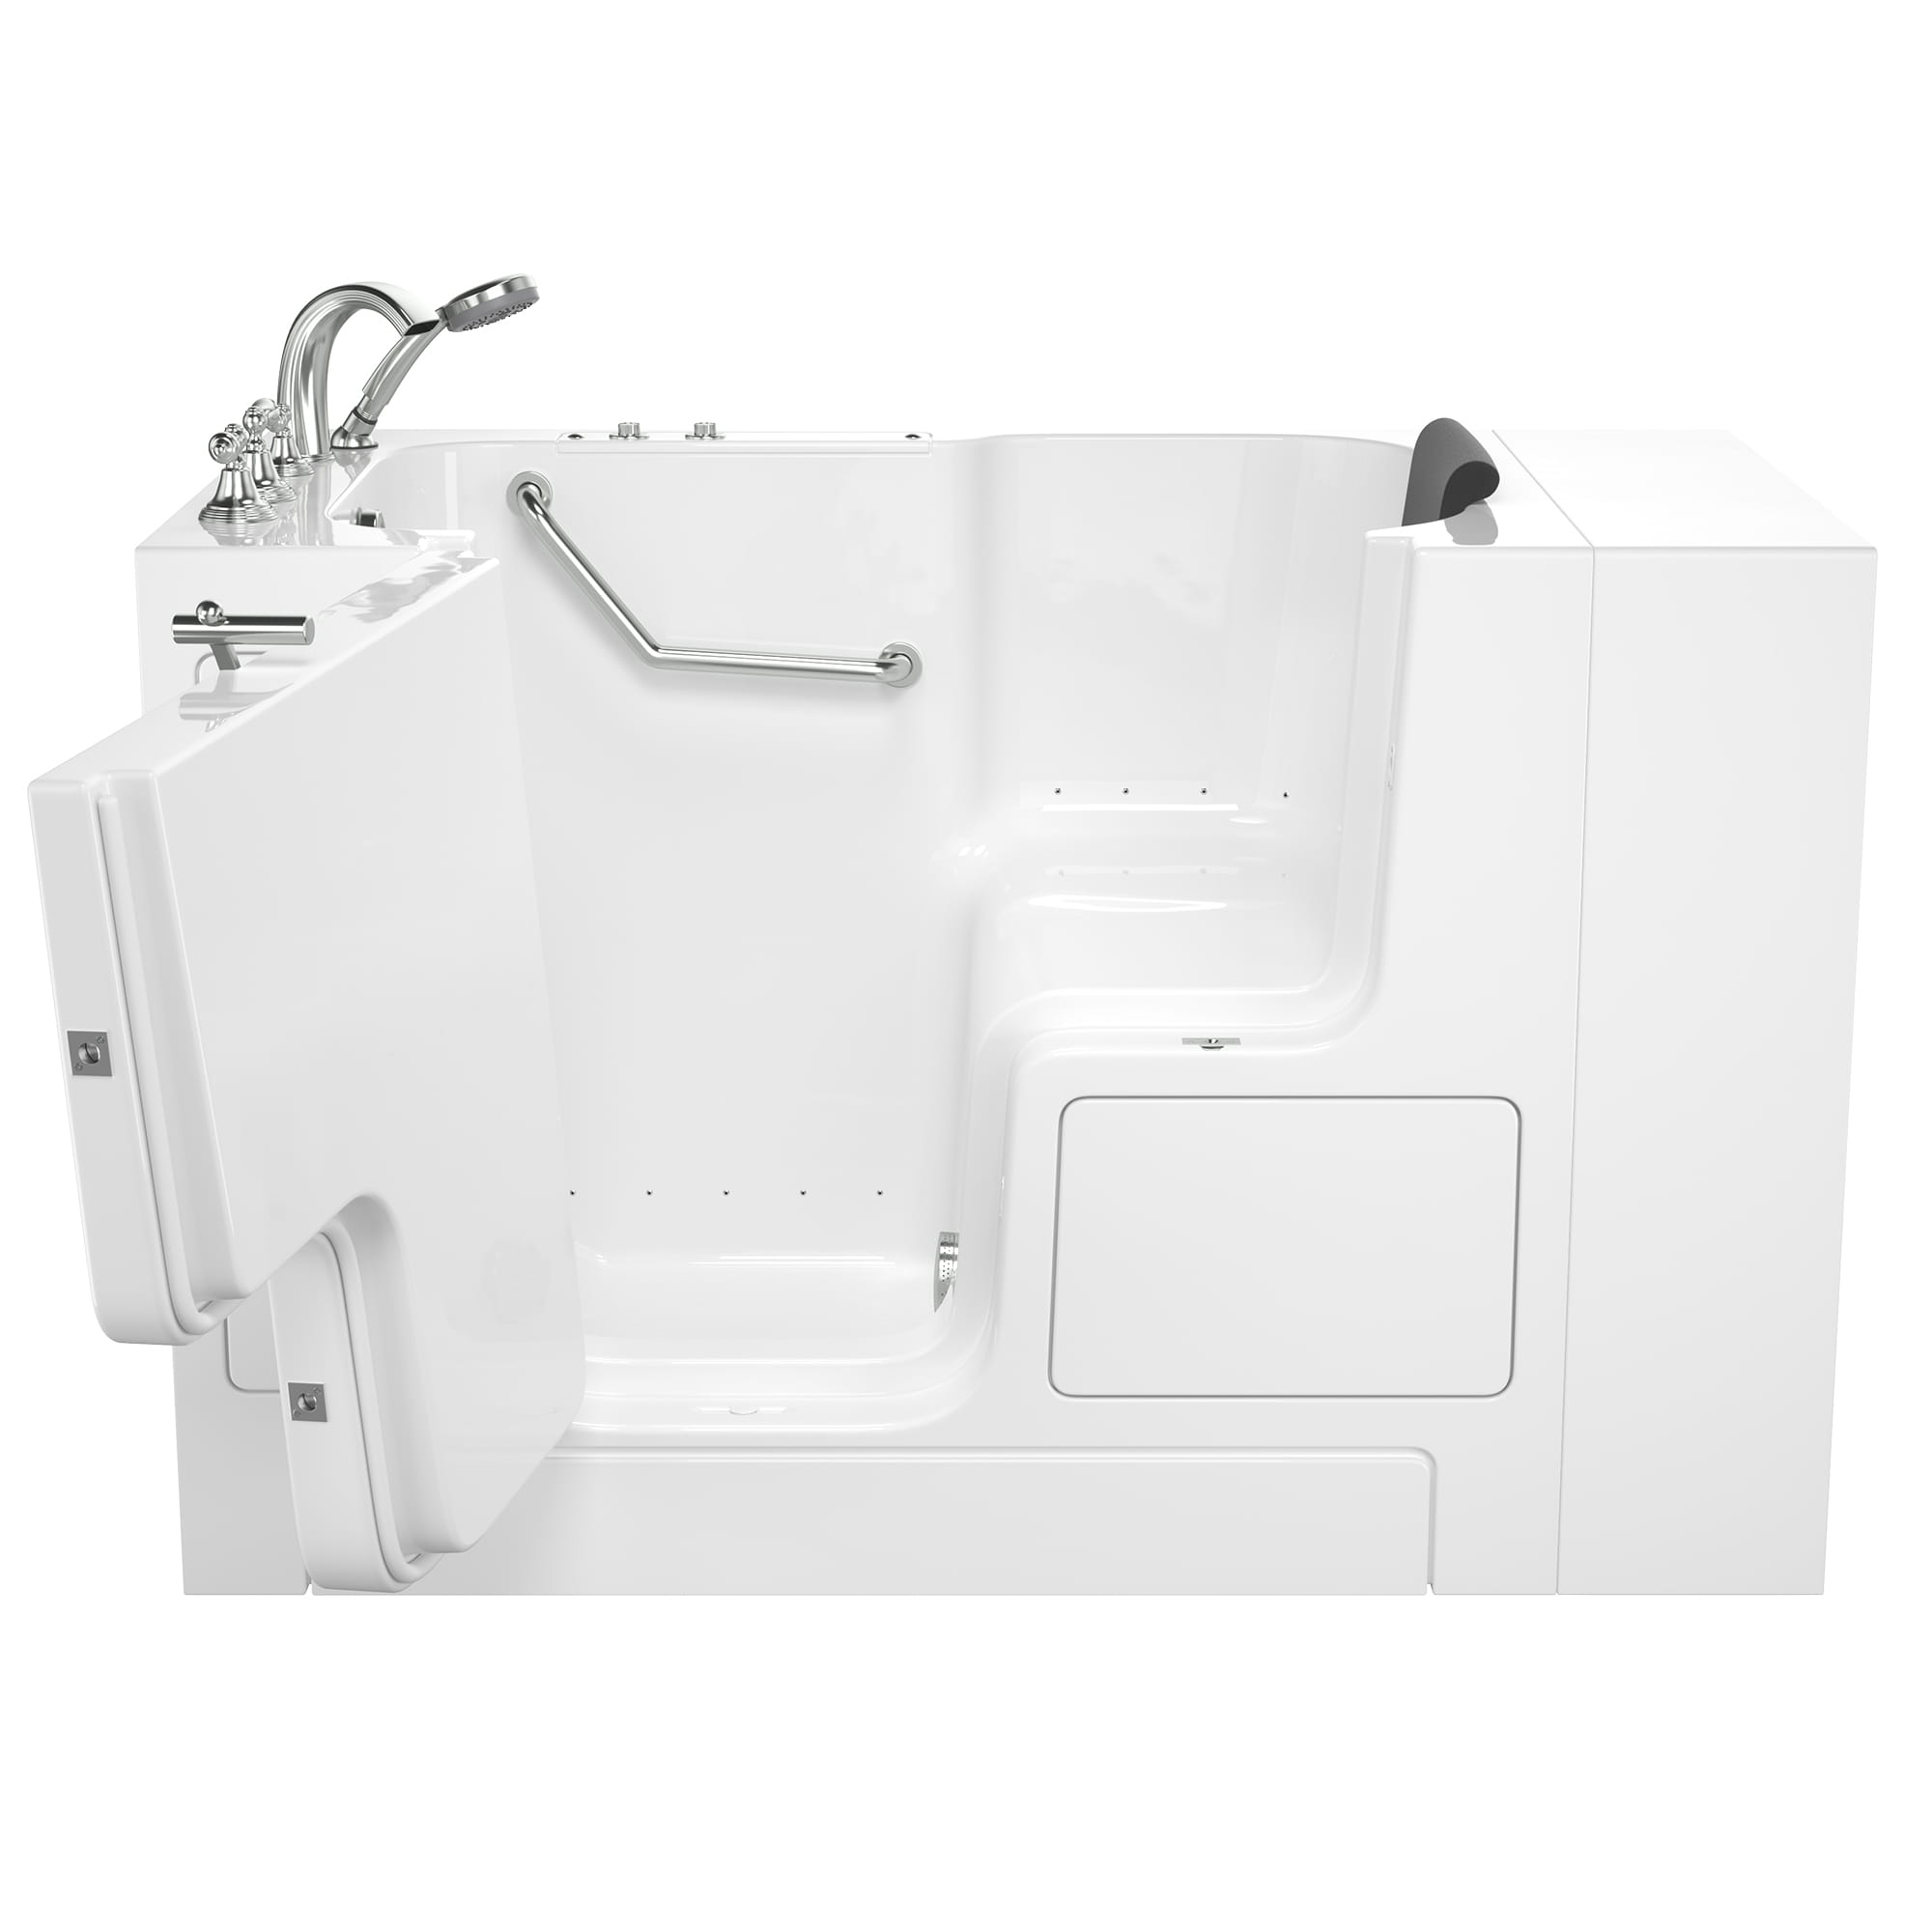 Gelcoat Premium Series 32 x 52 -Inch Walk-in Tub With Air Spa System - Left-Hand Drain With Faucet